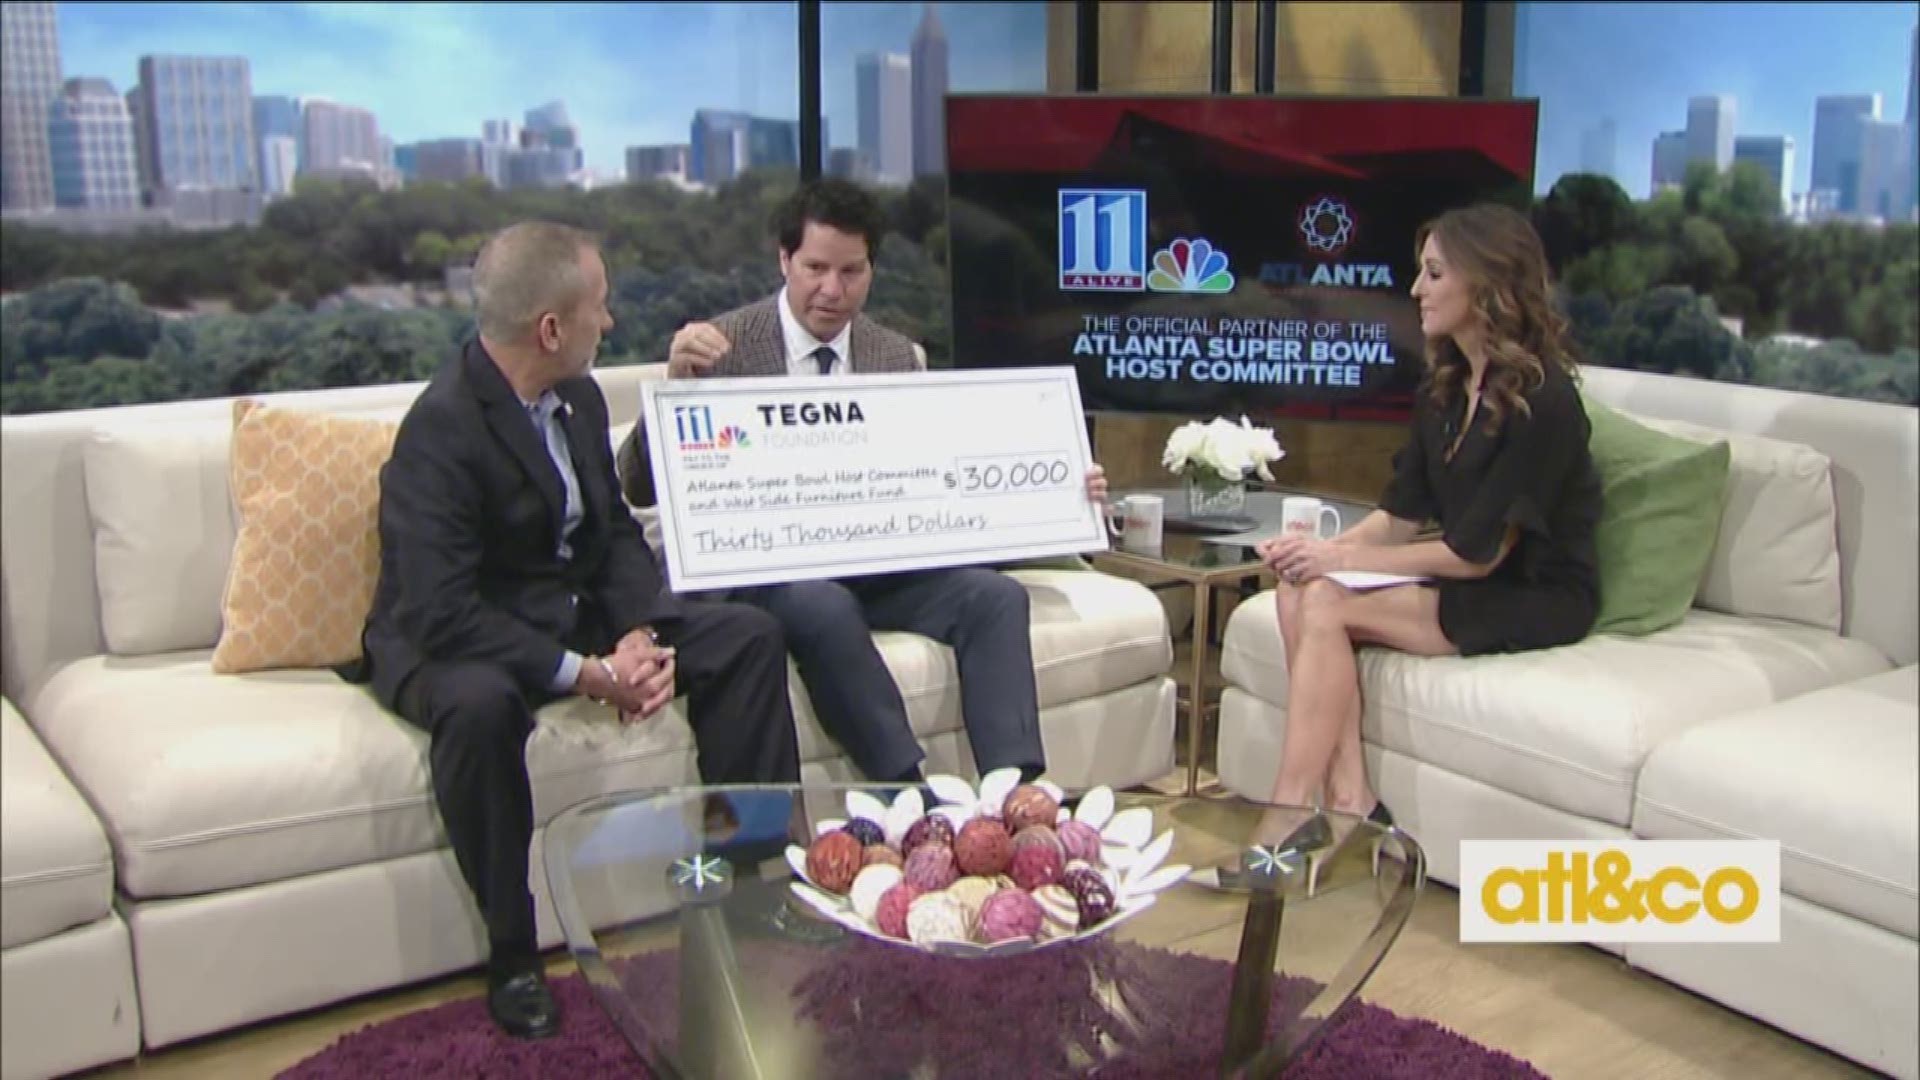 11Alive and the TEGNA Foundation are proud to partner with the Atlanta Super Bowl Host Committee and support their Legacy 53 Foundation with a $30,000 grant for the Westside Future Fund.